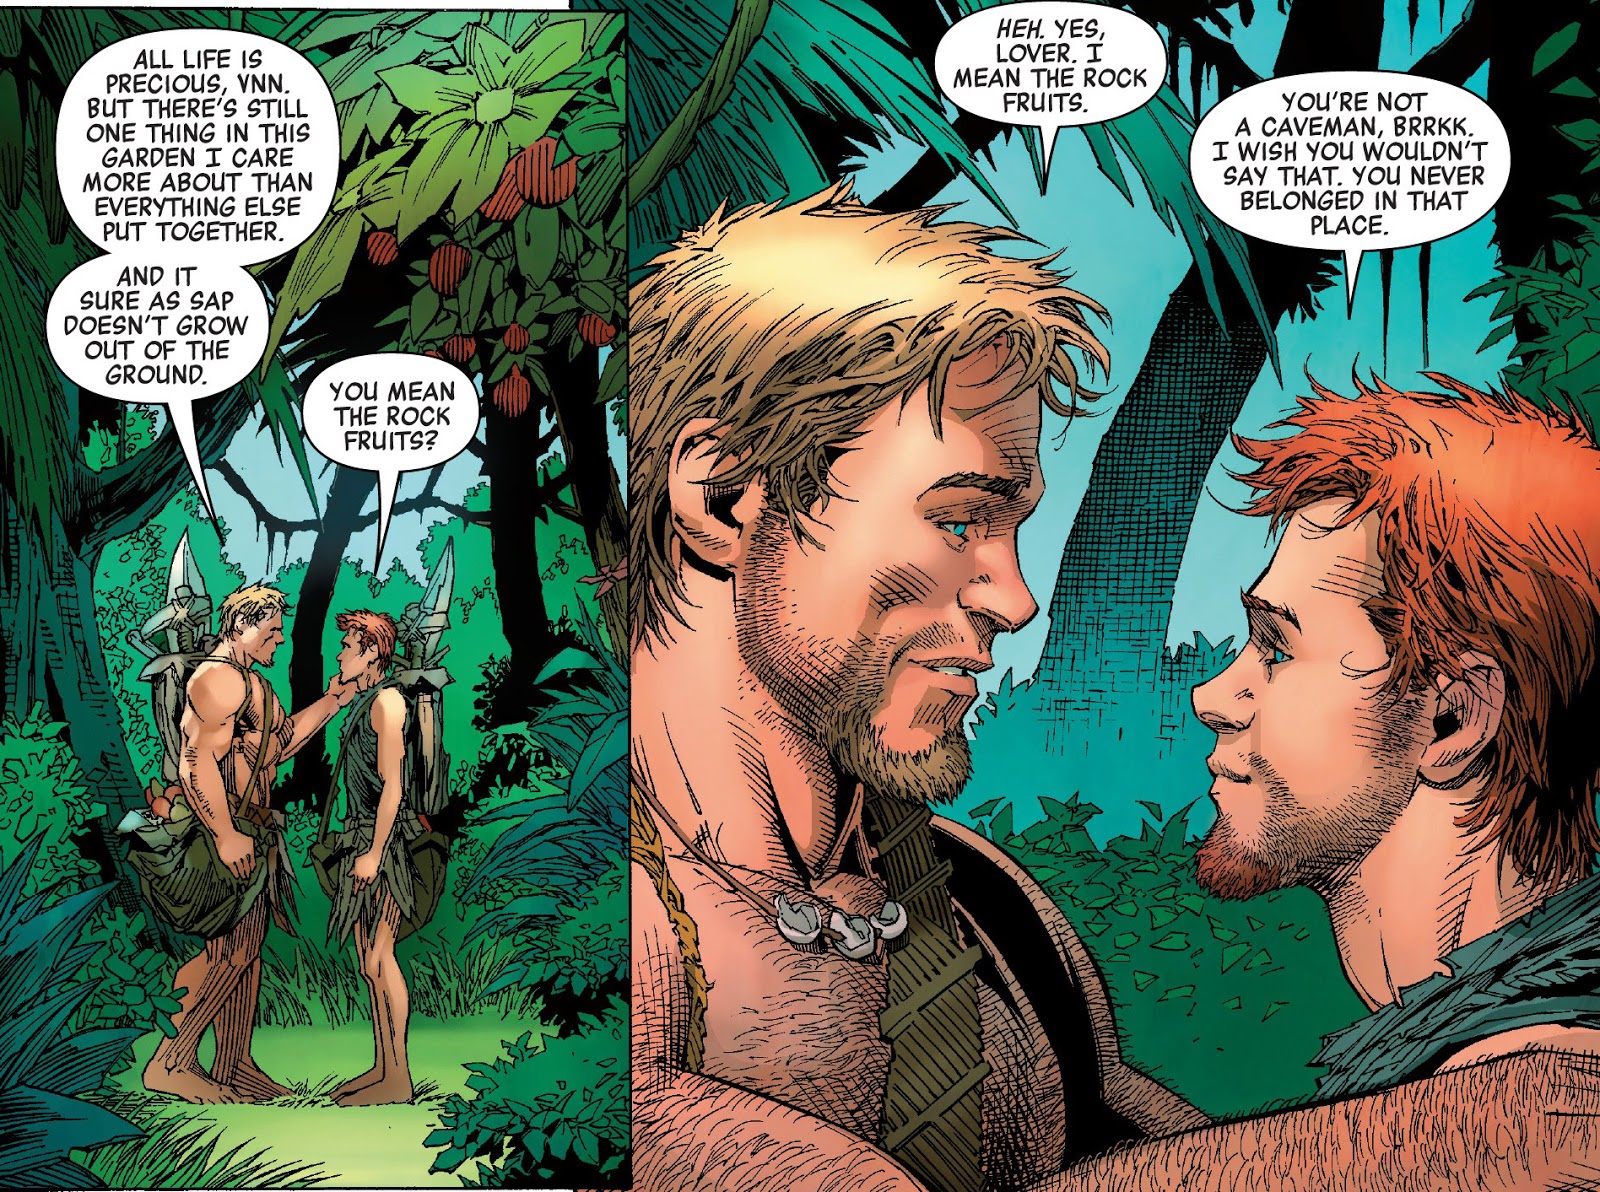 Avengers #28 feature a prehistoric gay couple, one of them would go on to b...